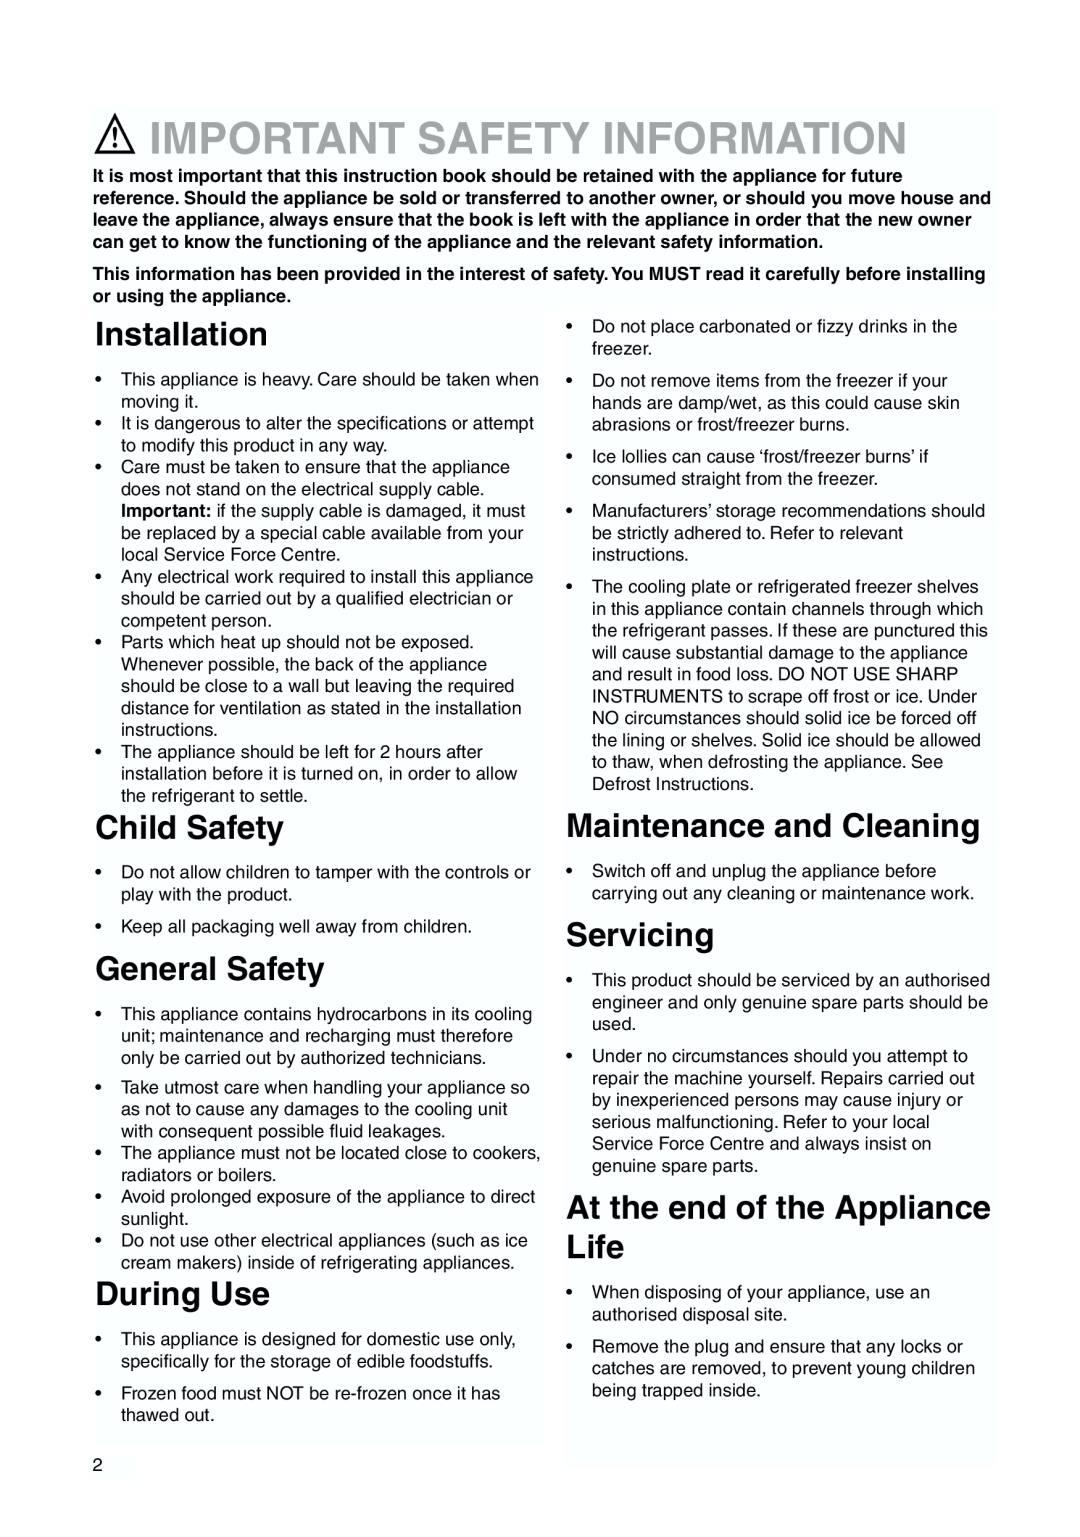 Zanussi ZI 918/9 FFA manual Important Safety Information, Installation, Child Safety, General Safety, During Use, Servicing 